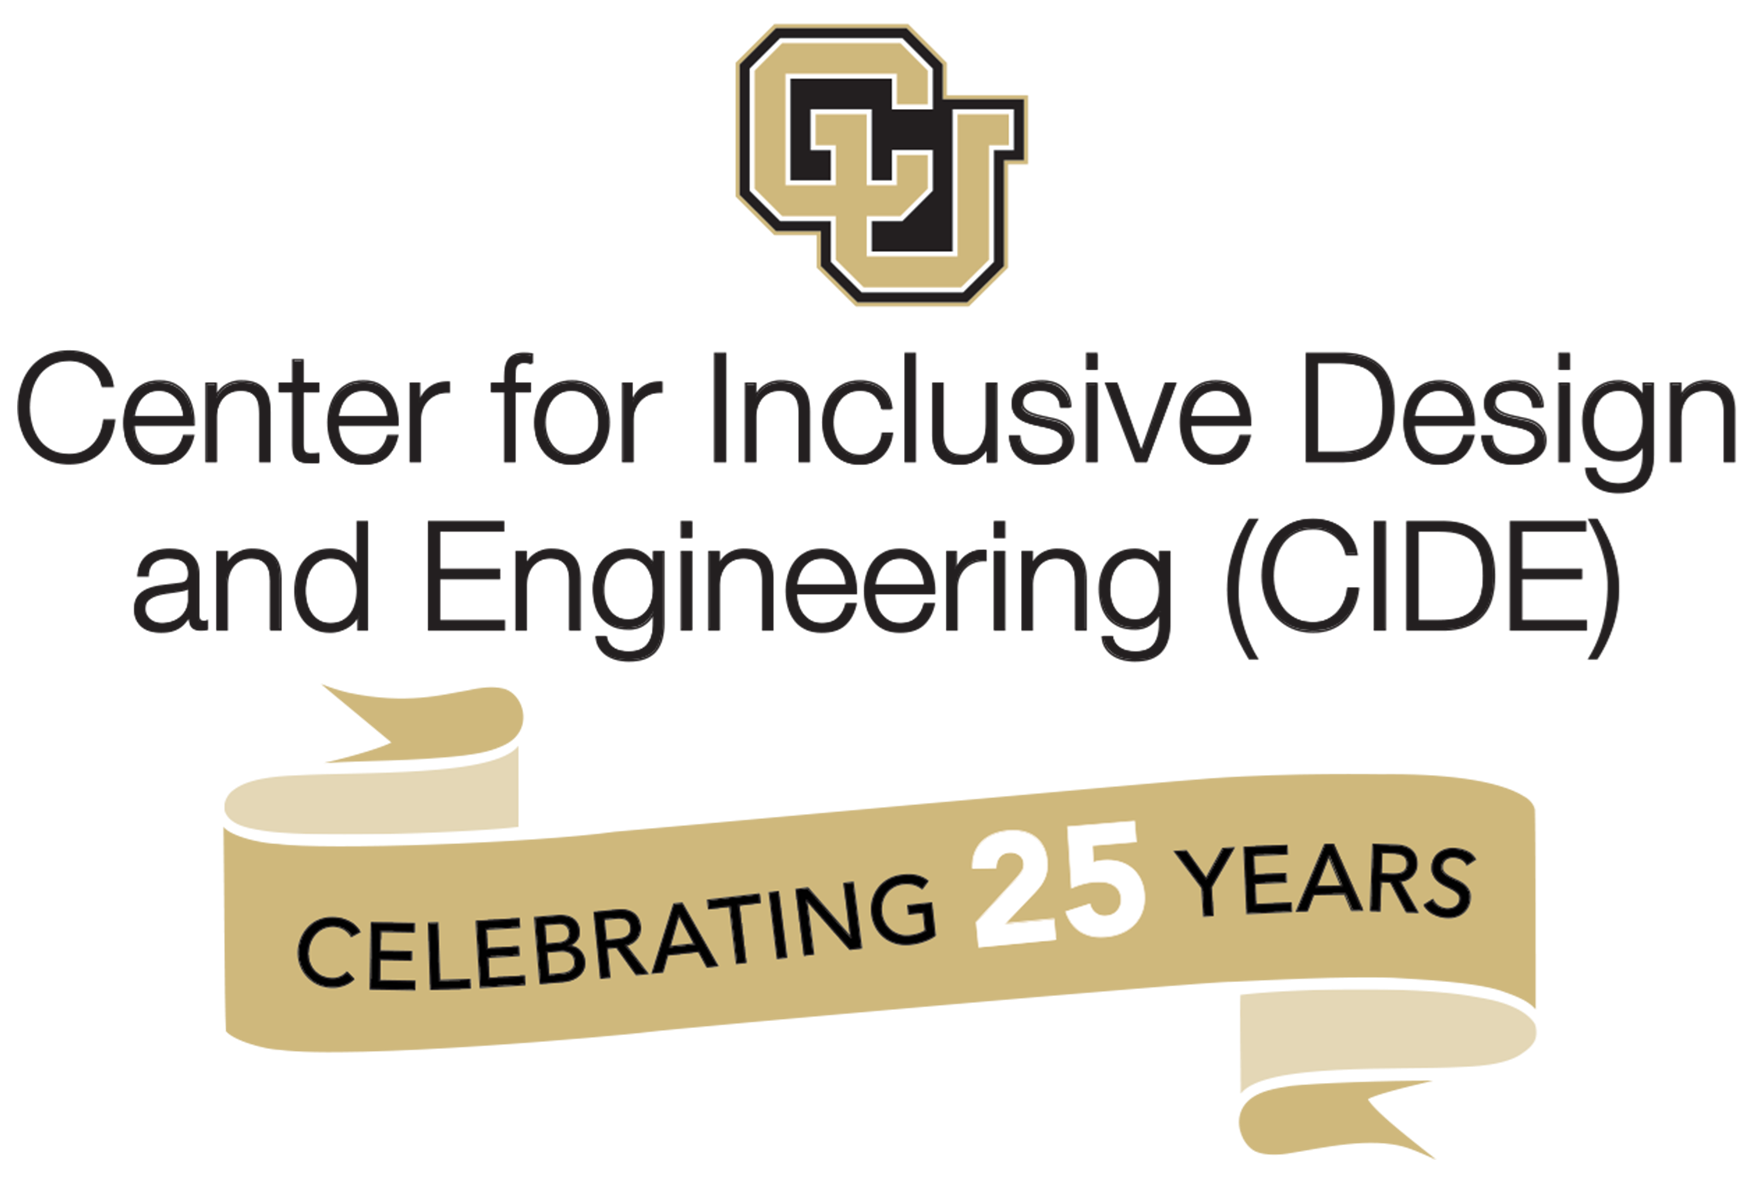 Center for Inclusive Design and Engineering Logo